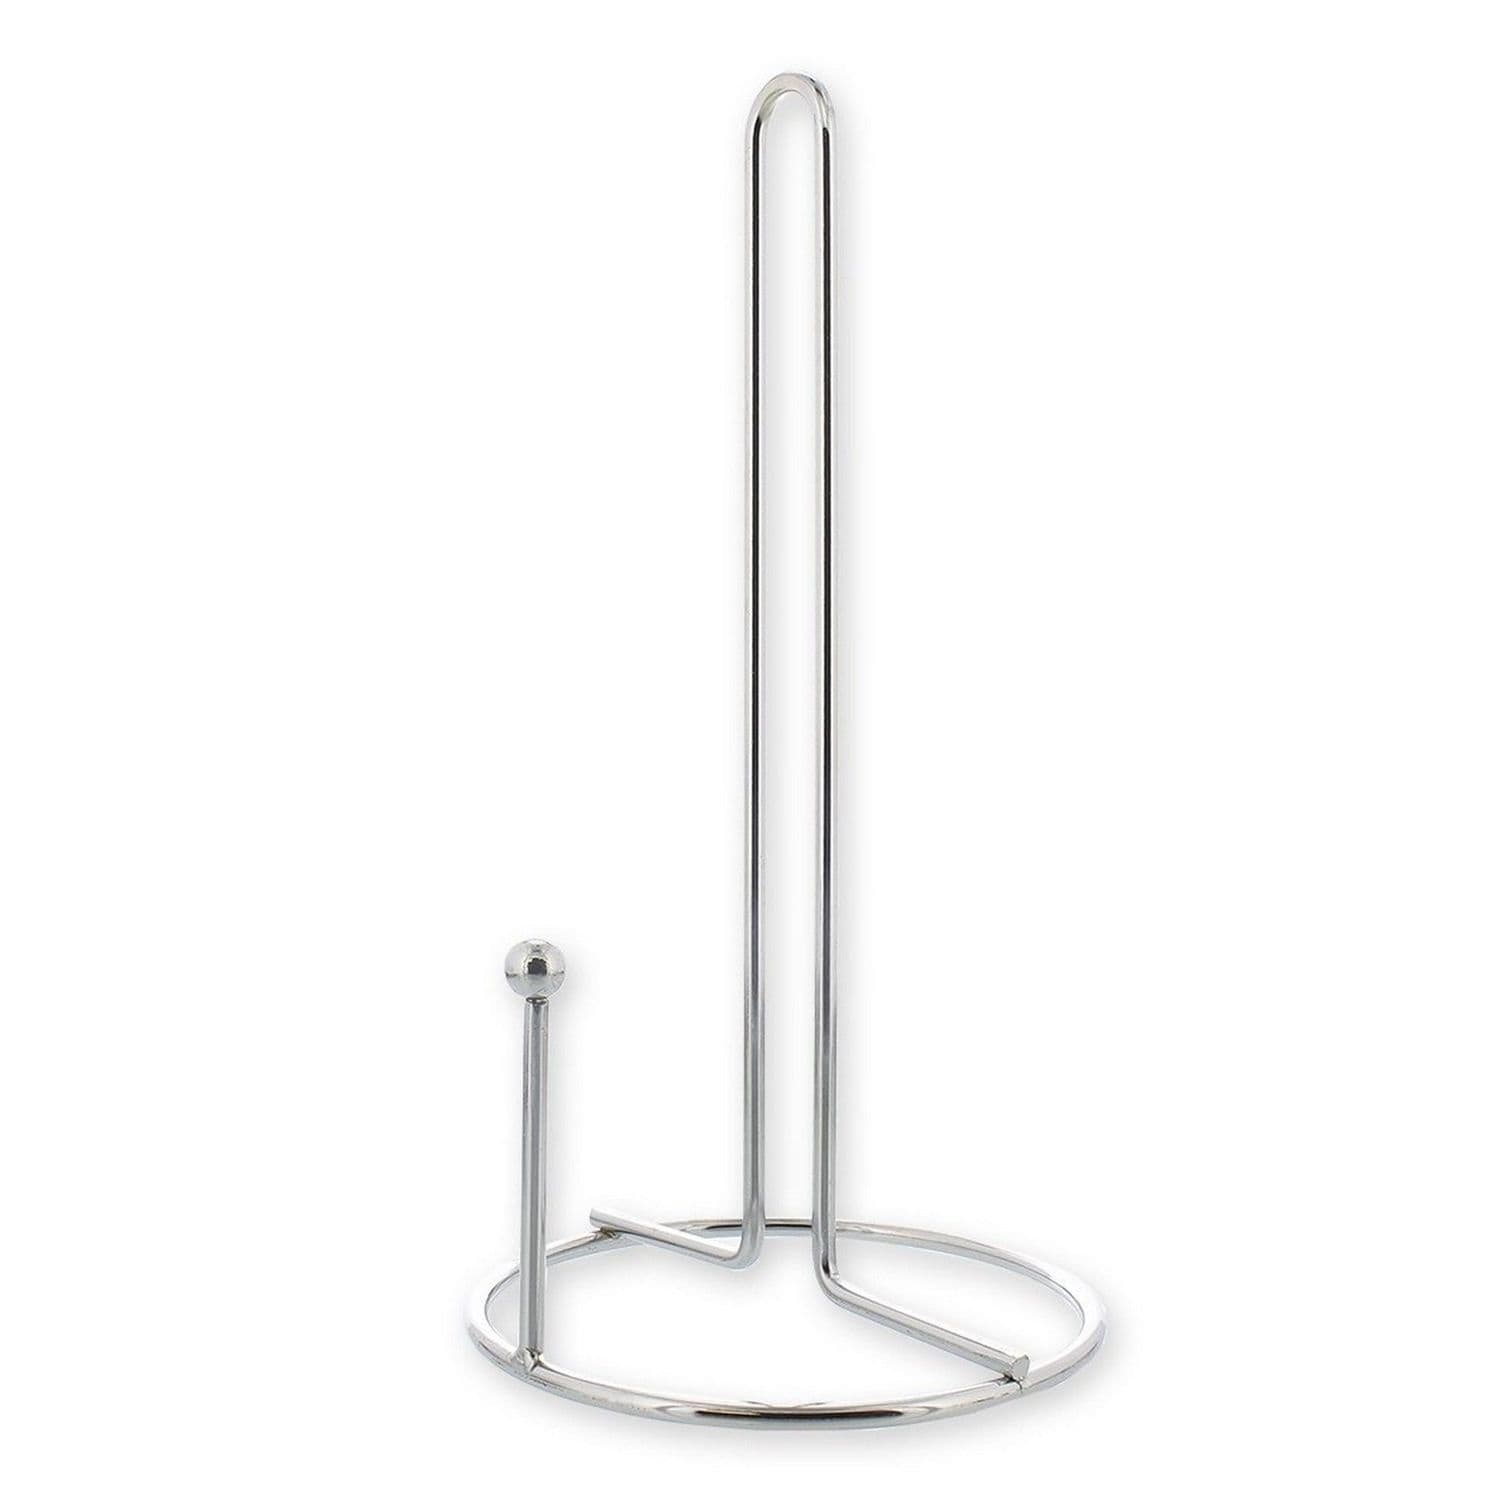 https://ak1.ostkcdn.com/images/products/29792924/Stainless-Steel-Vertical-Stand-for-Paper-Towel-Holders-5.5-x-11.5-575d5577-14ac-45be-8716-5193c598609a.jpg